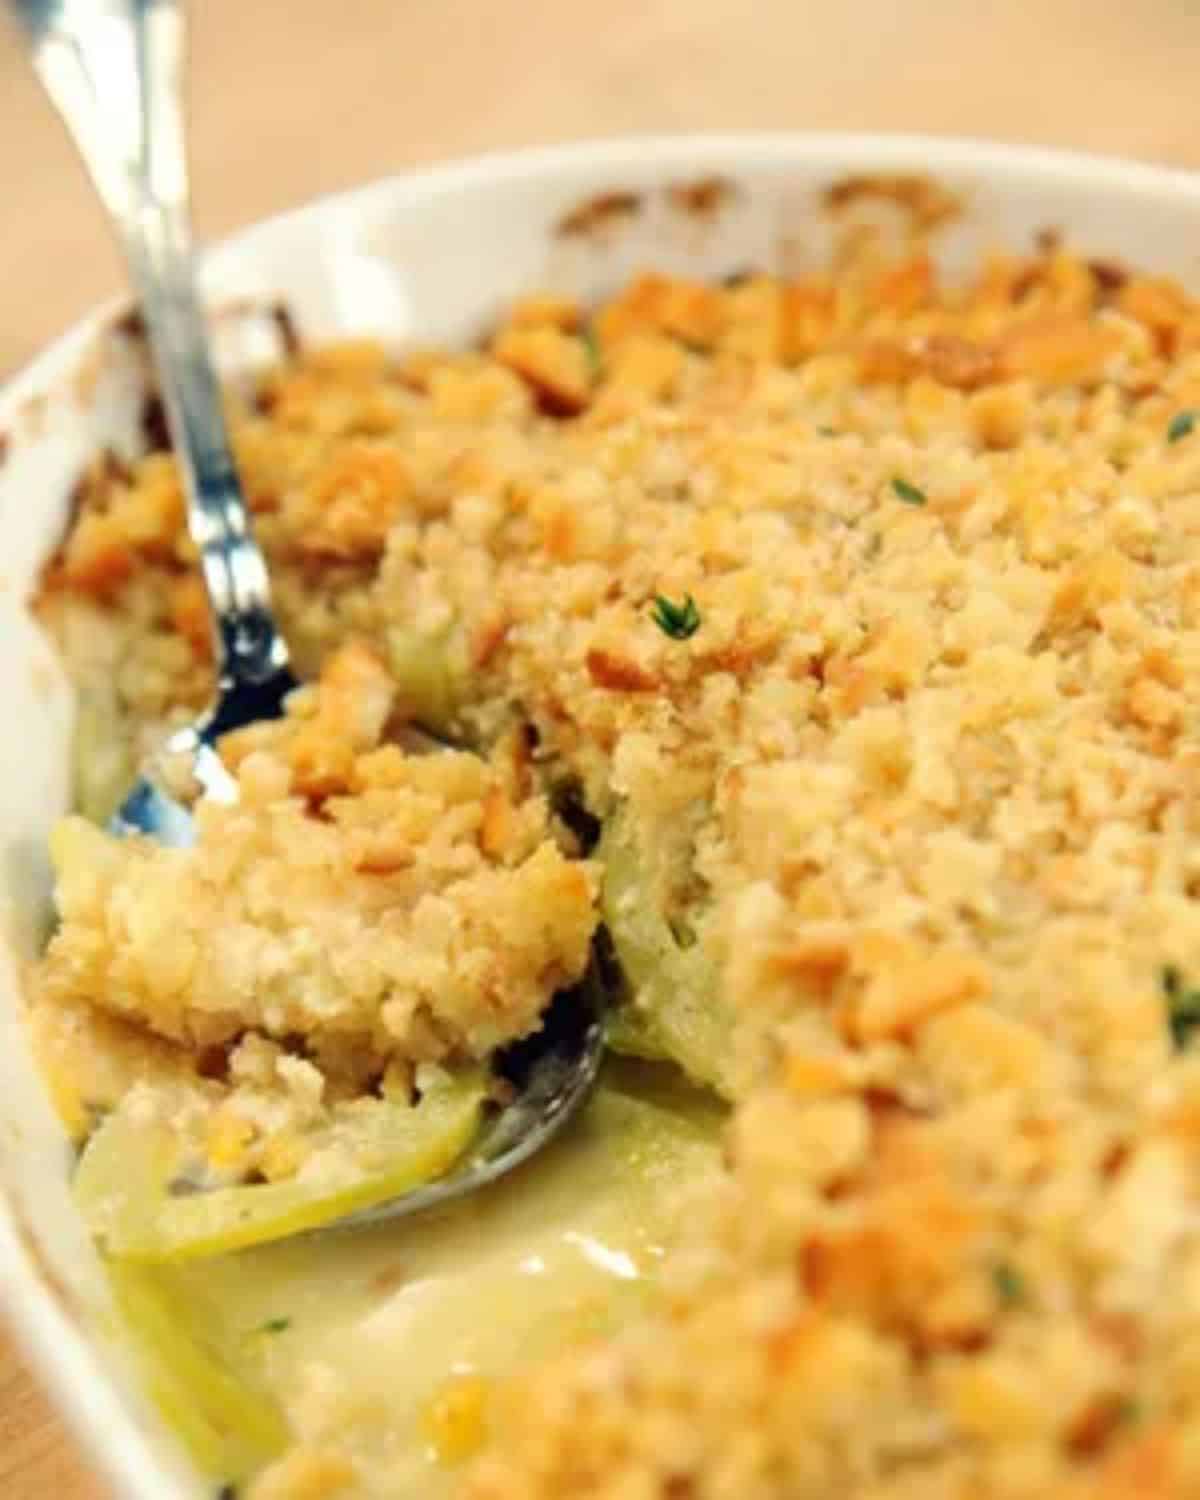 Scalloped green tomatoes dish in a white casserole with a spoon.